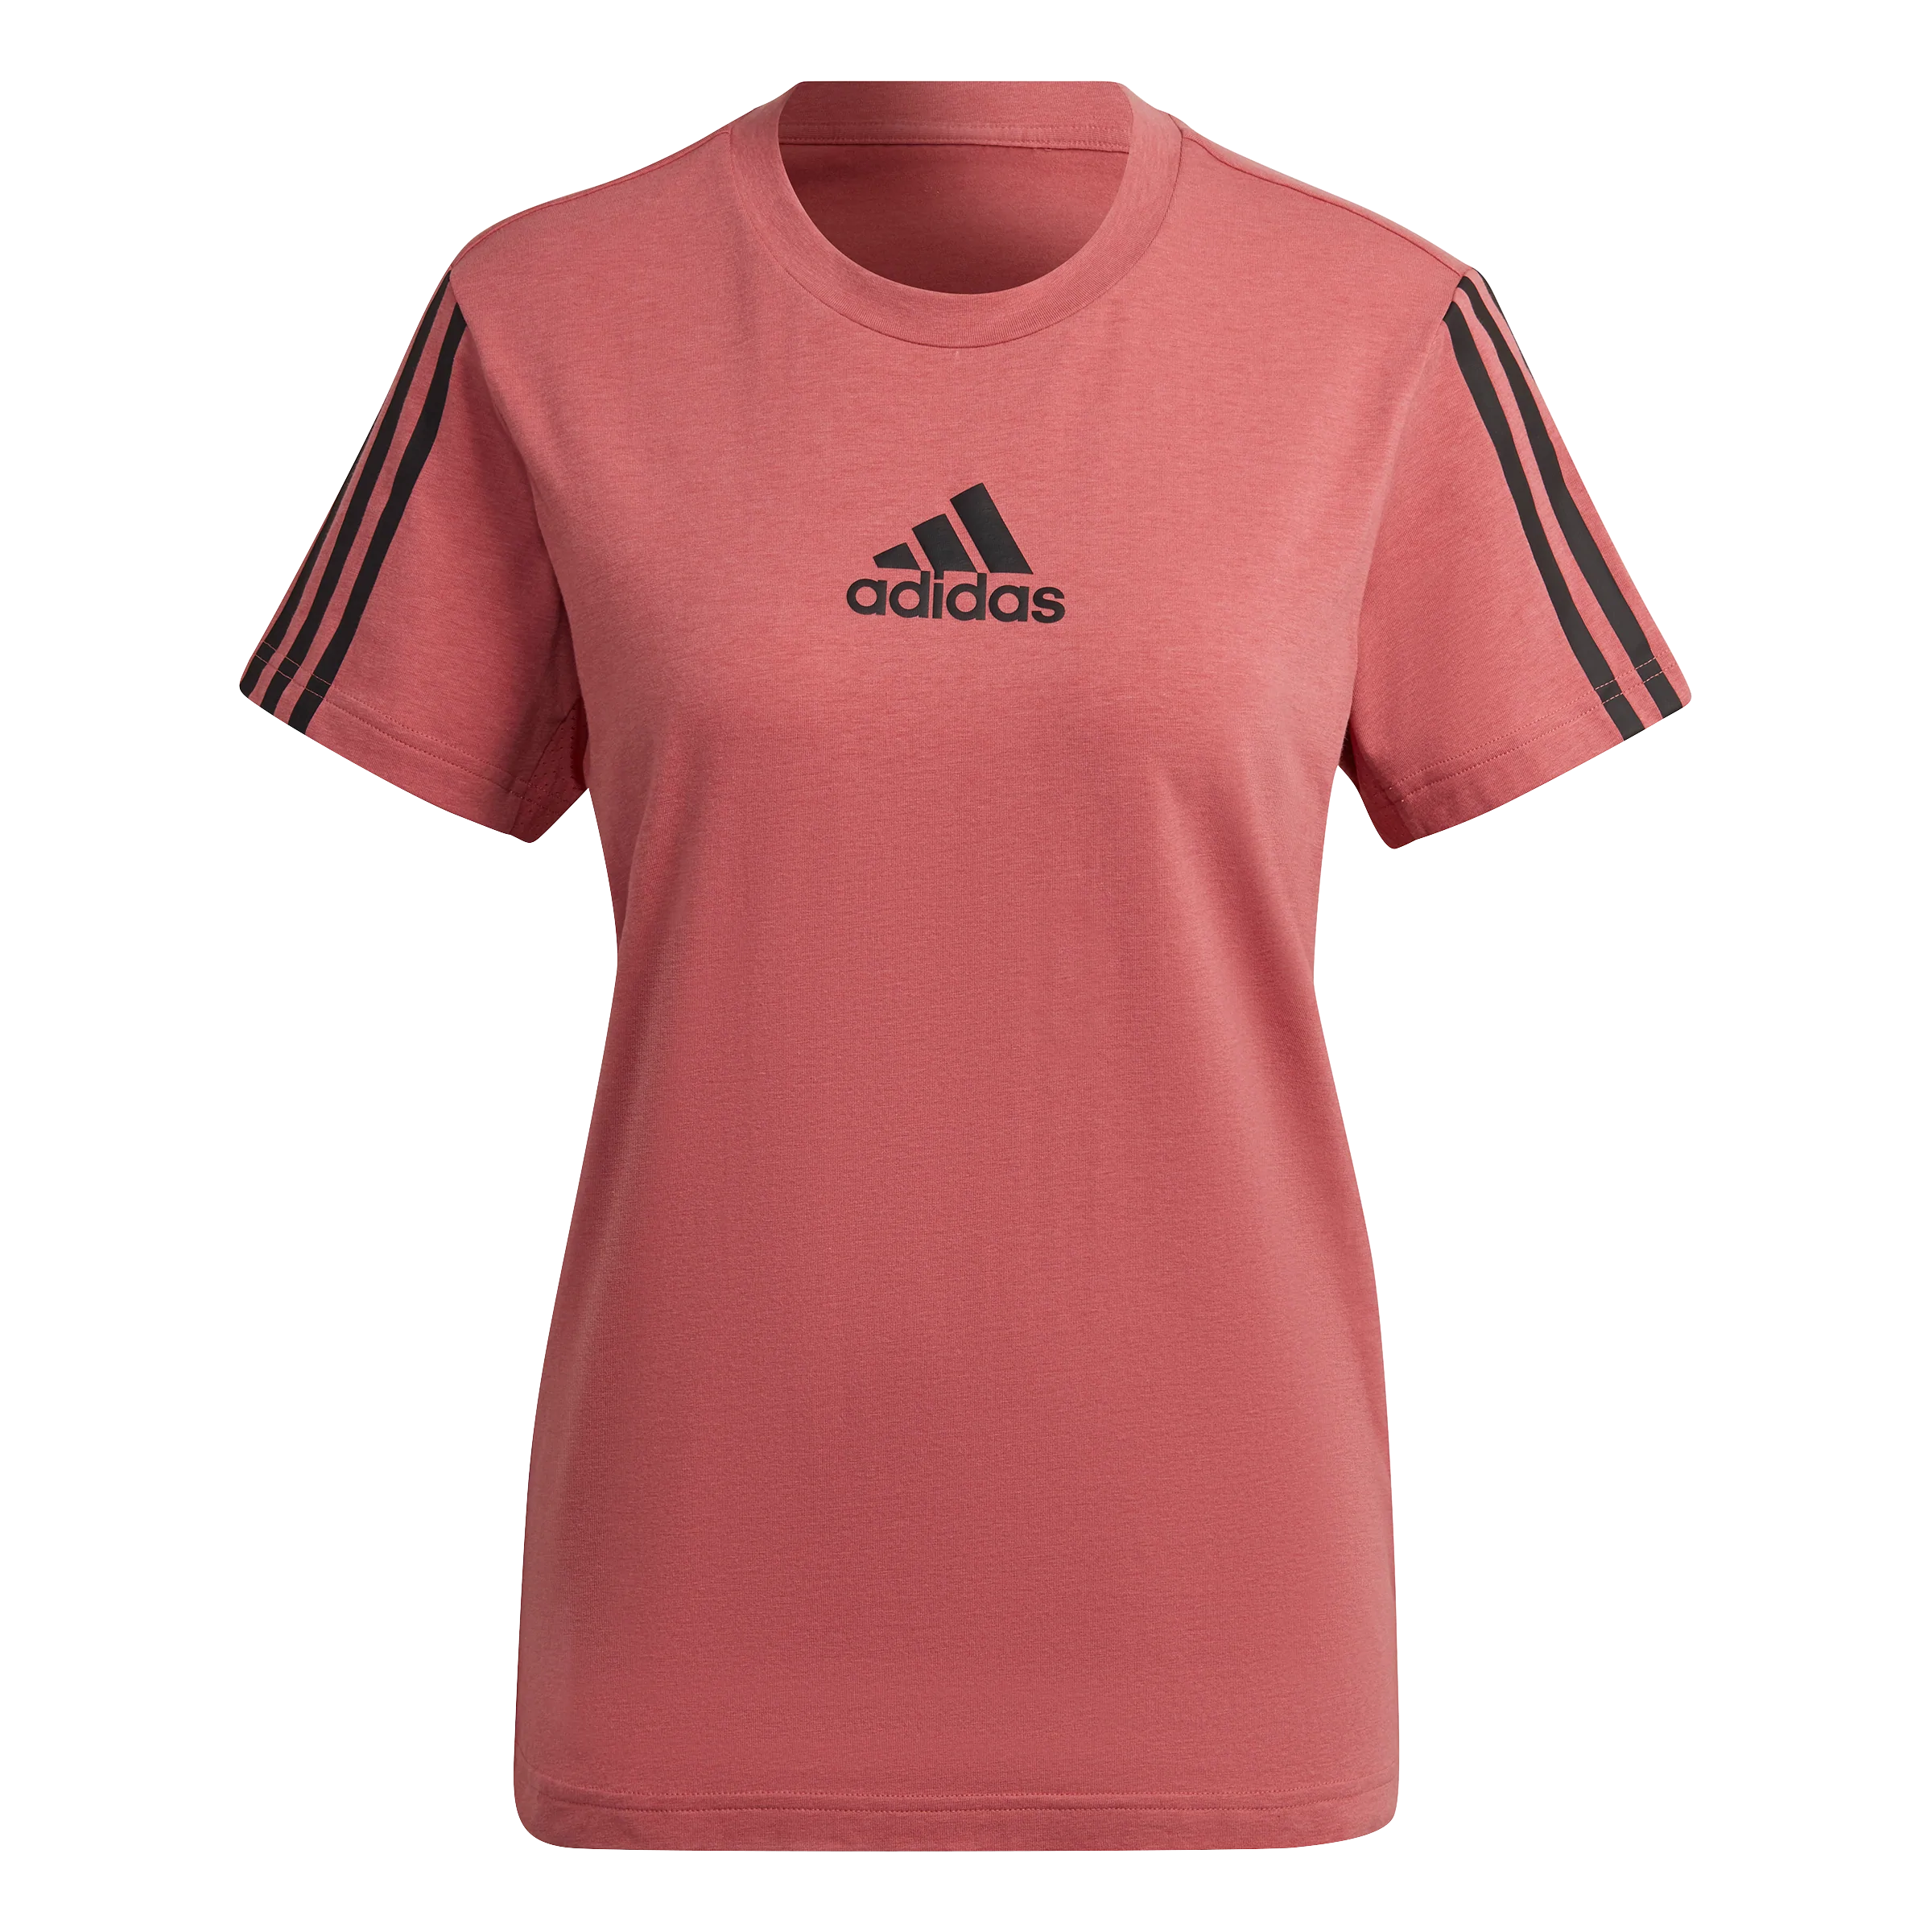 adidas Aeroready Made for Training Cotton Touch Tee - Womens - Red